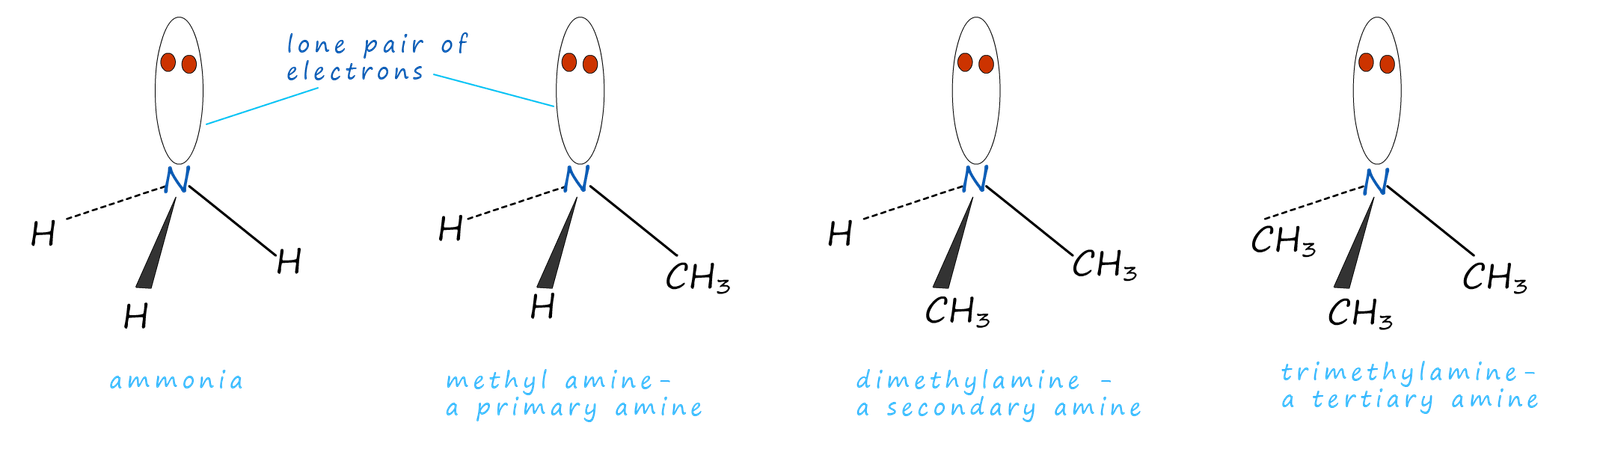 primary, secondary and tertiray mines.